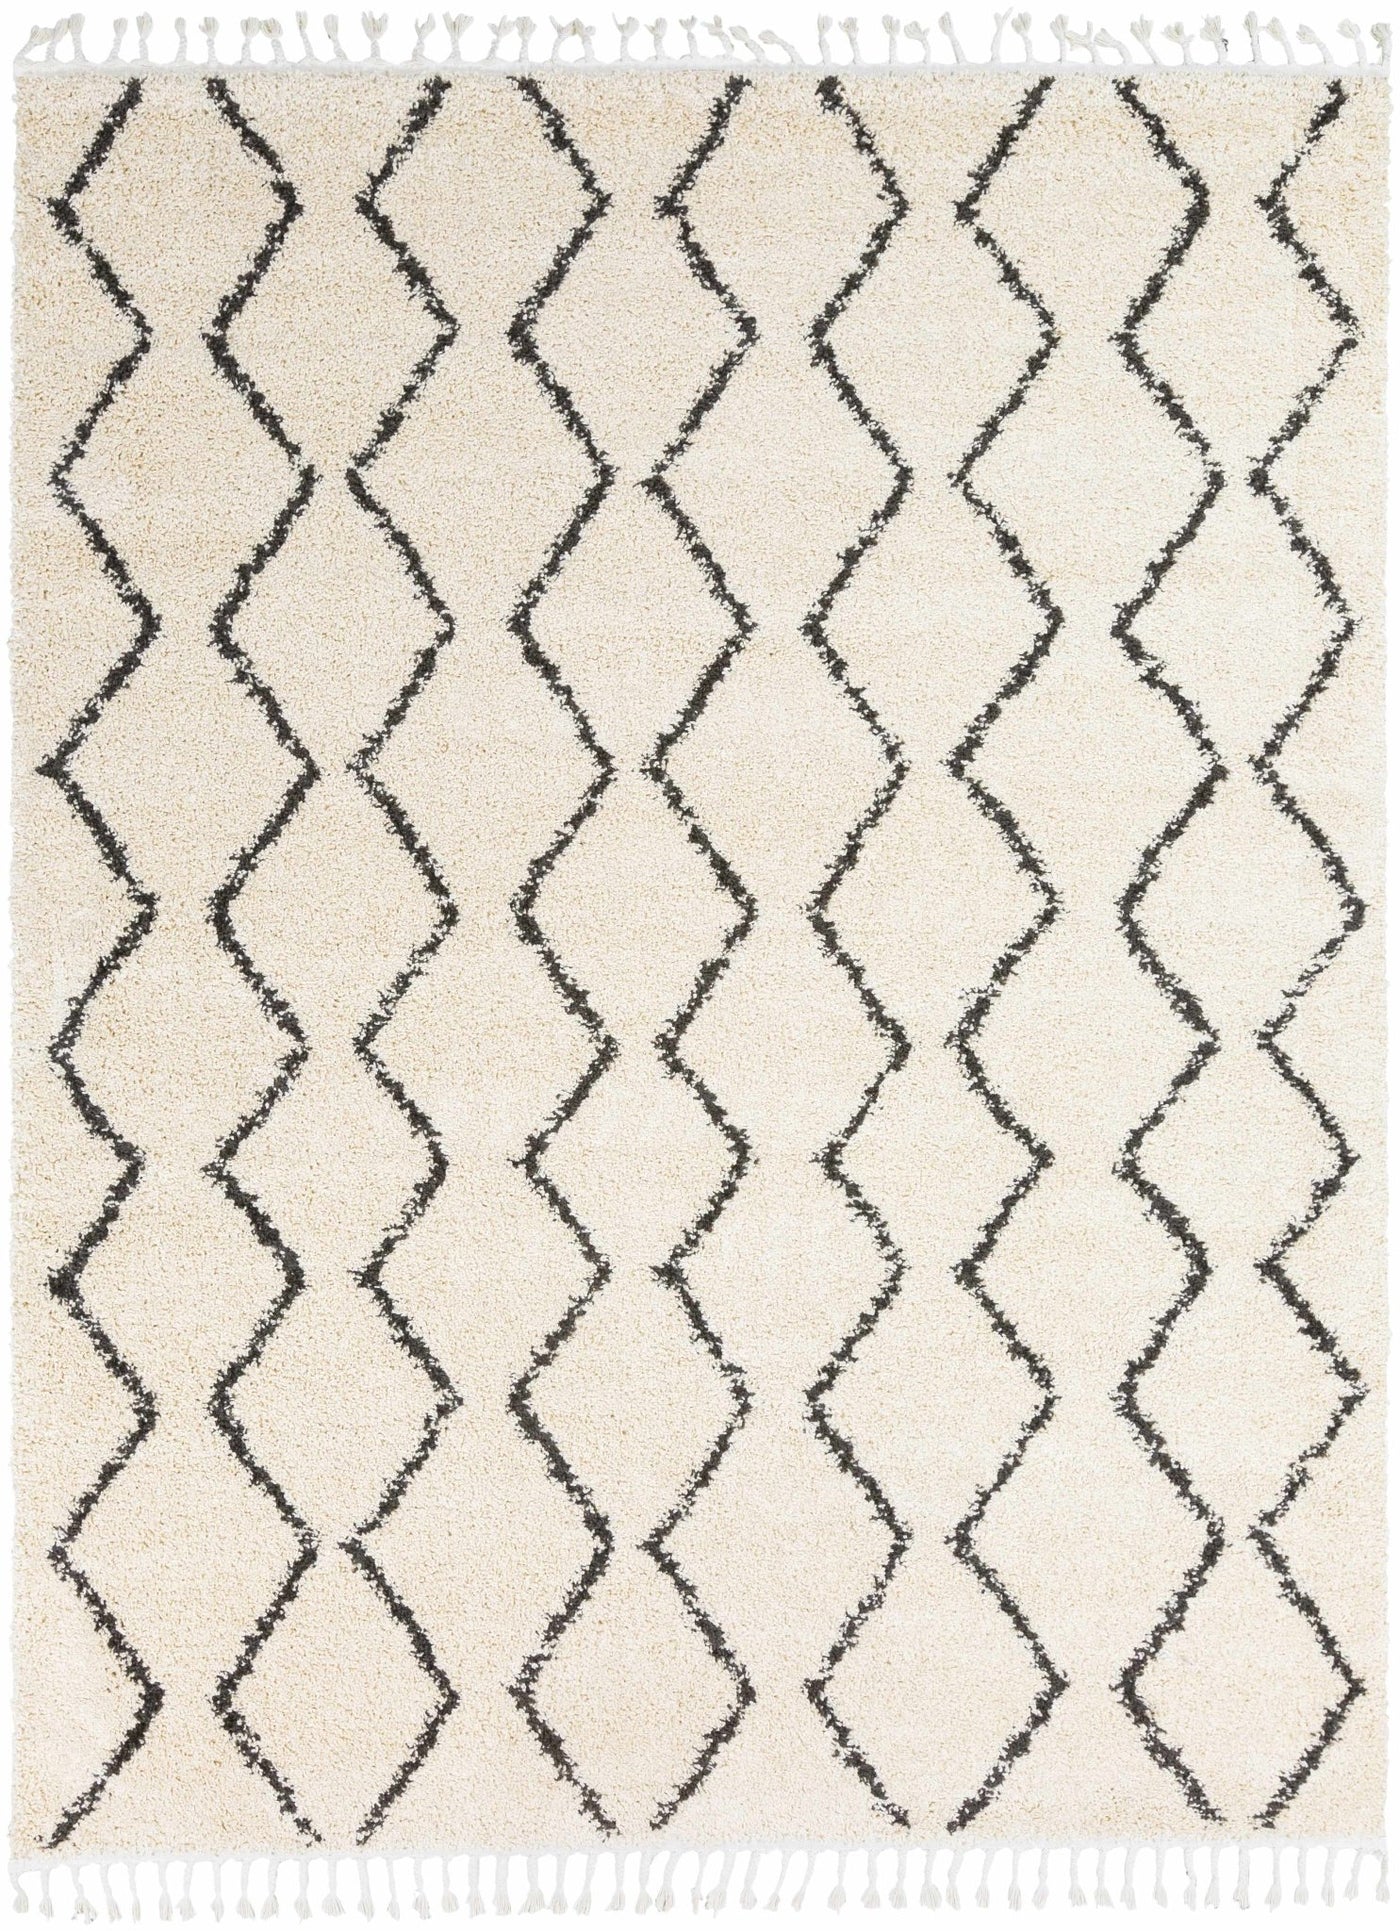 West End Plush Area Rug - Sweet Water Decor - Rugs